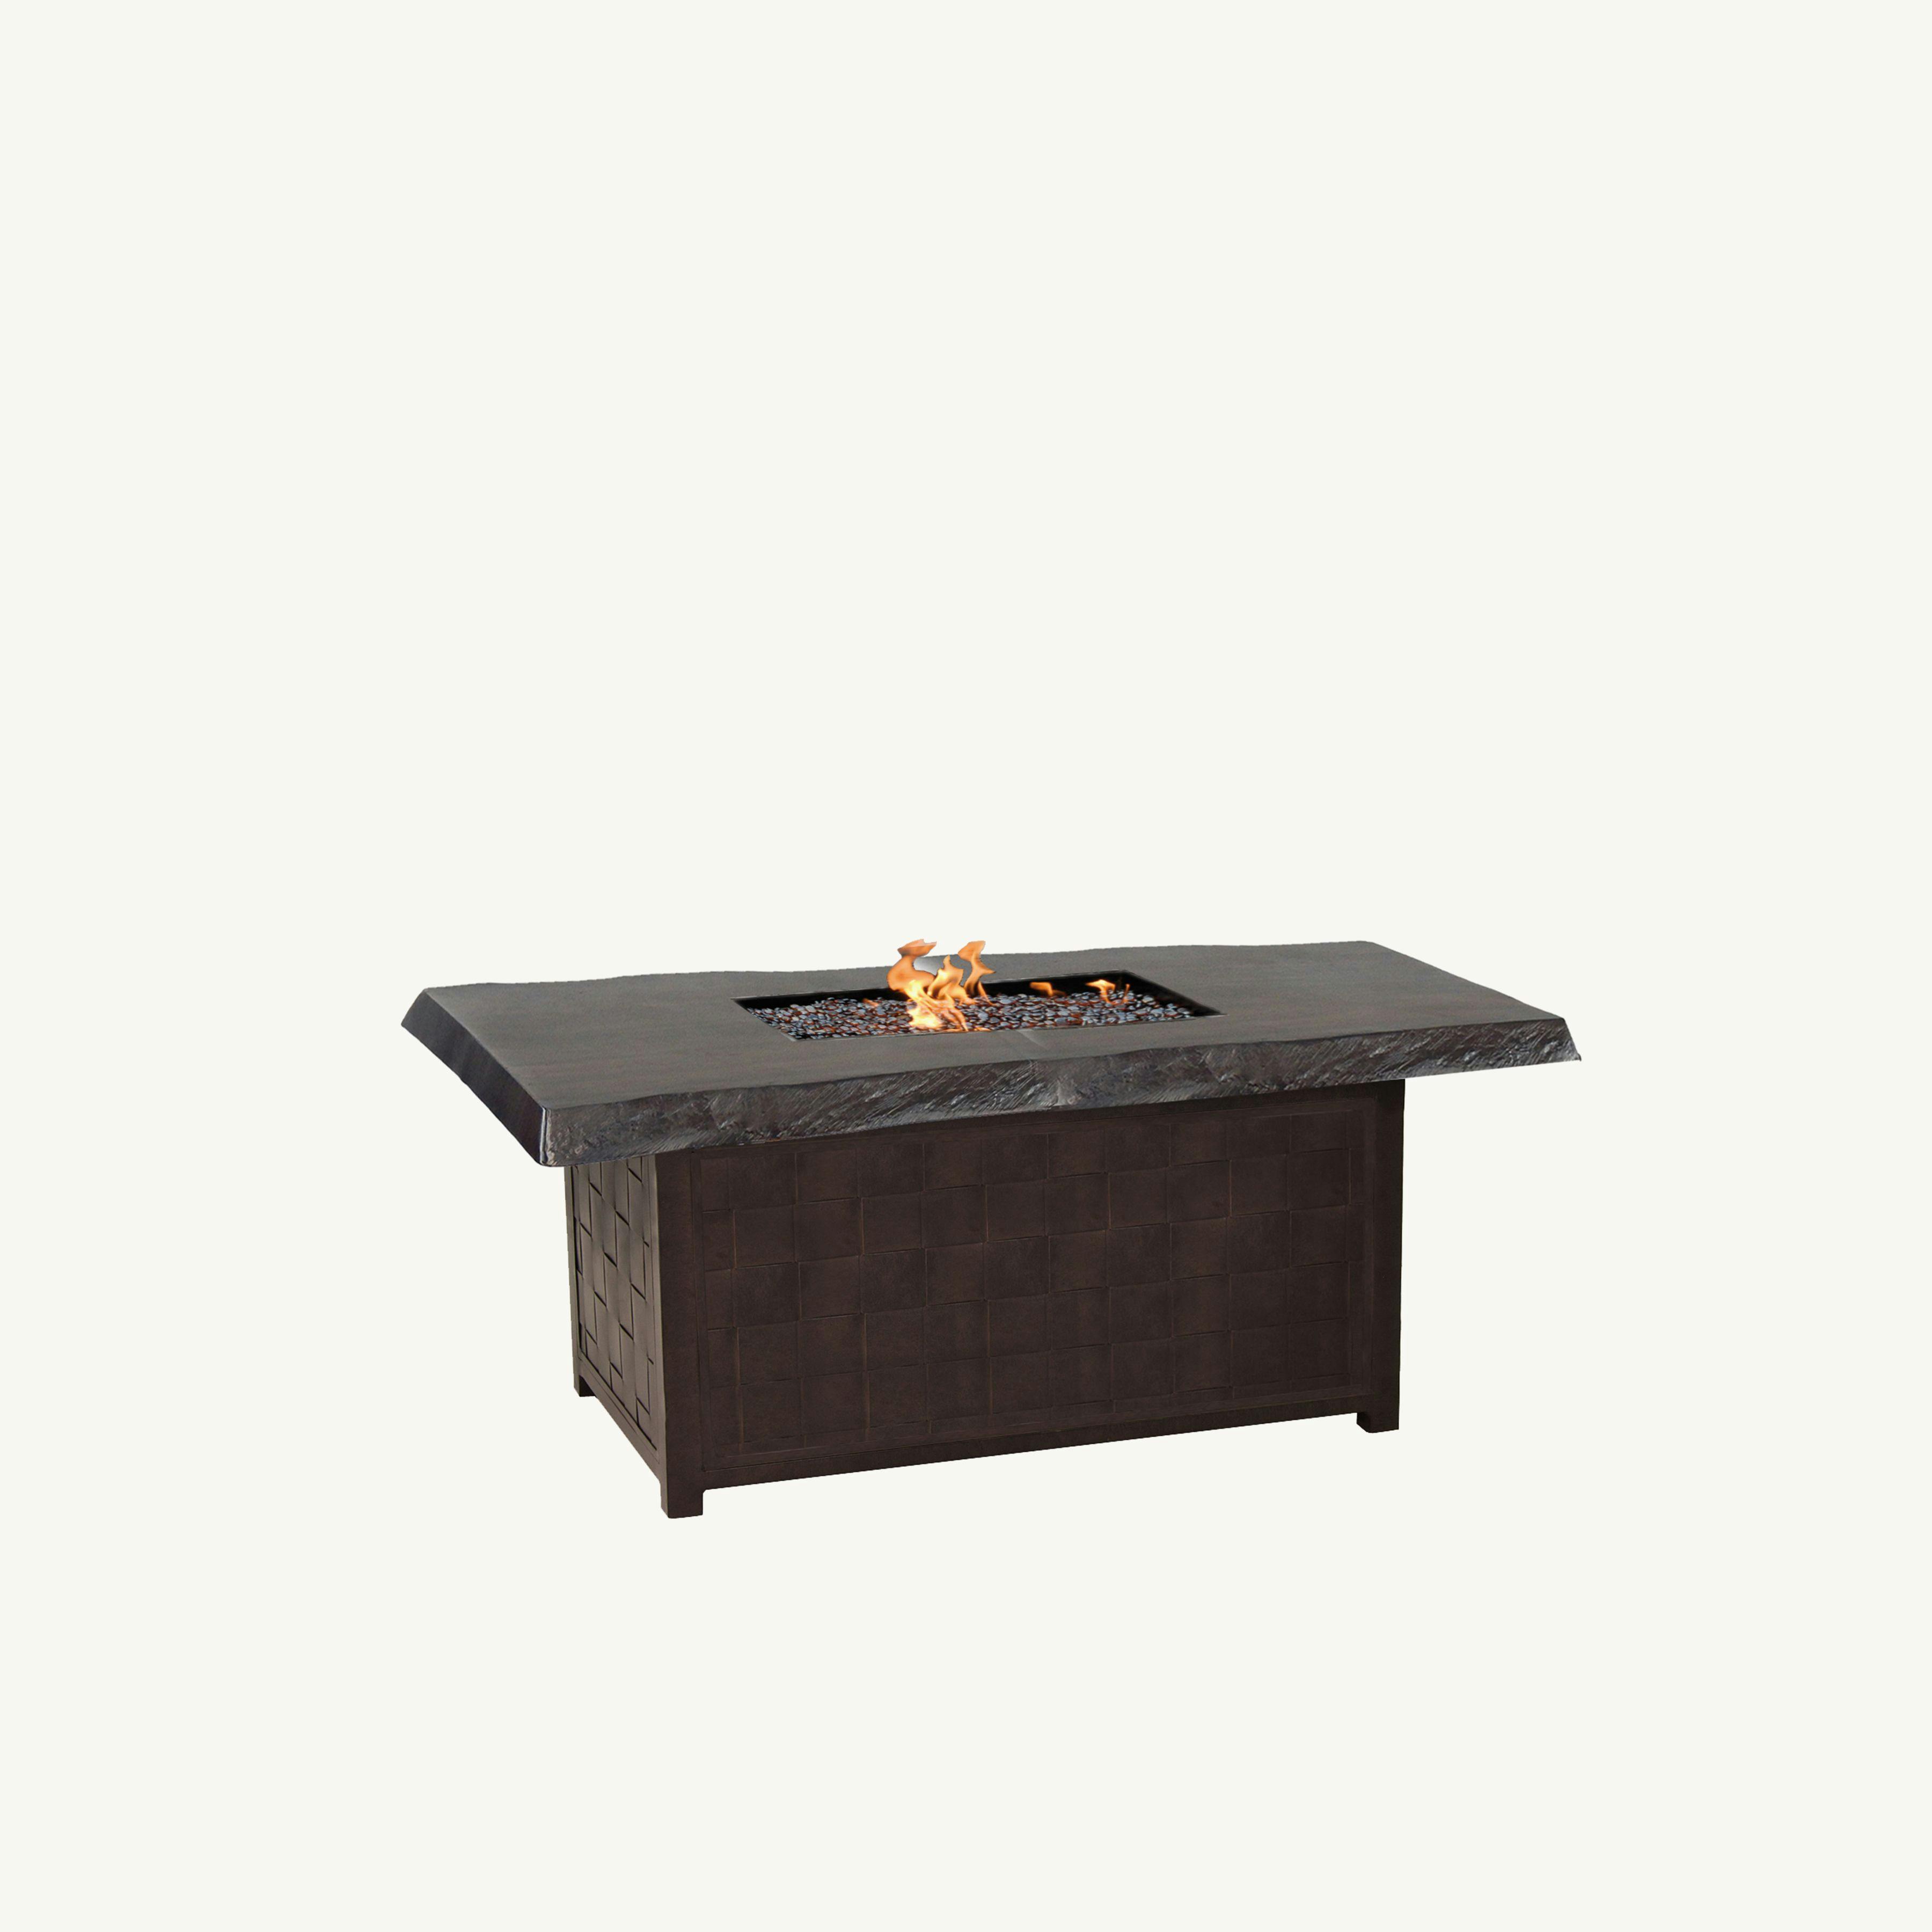 Classical 36" X 52" Rectangular Coffee Table With Firepit